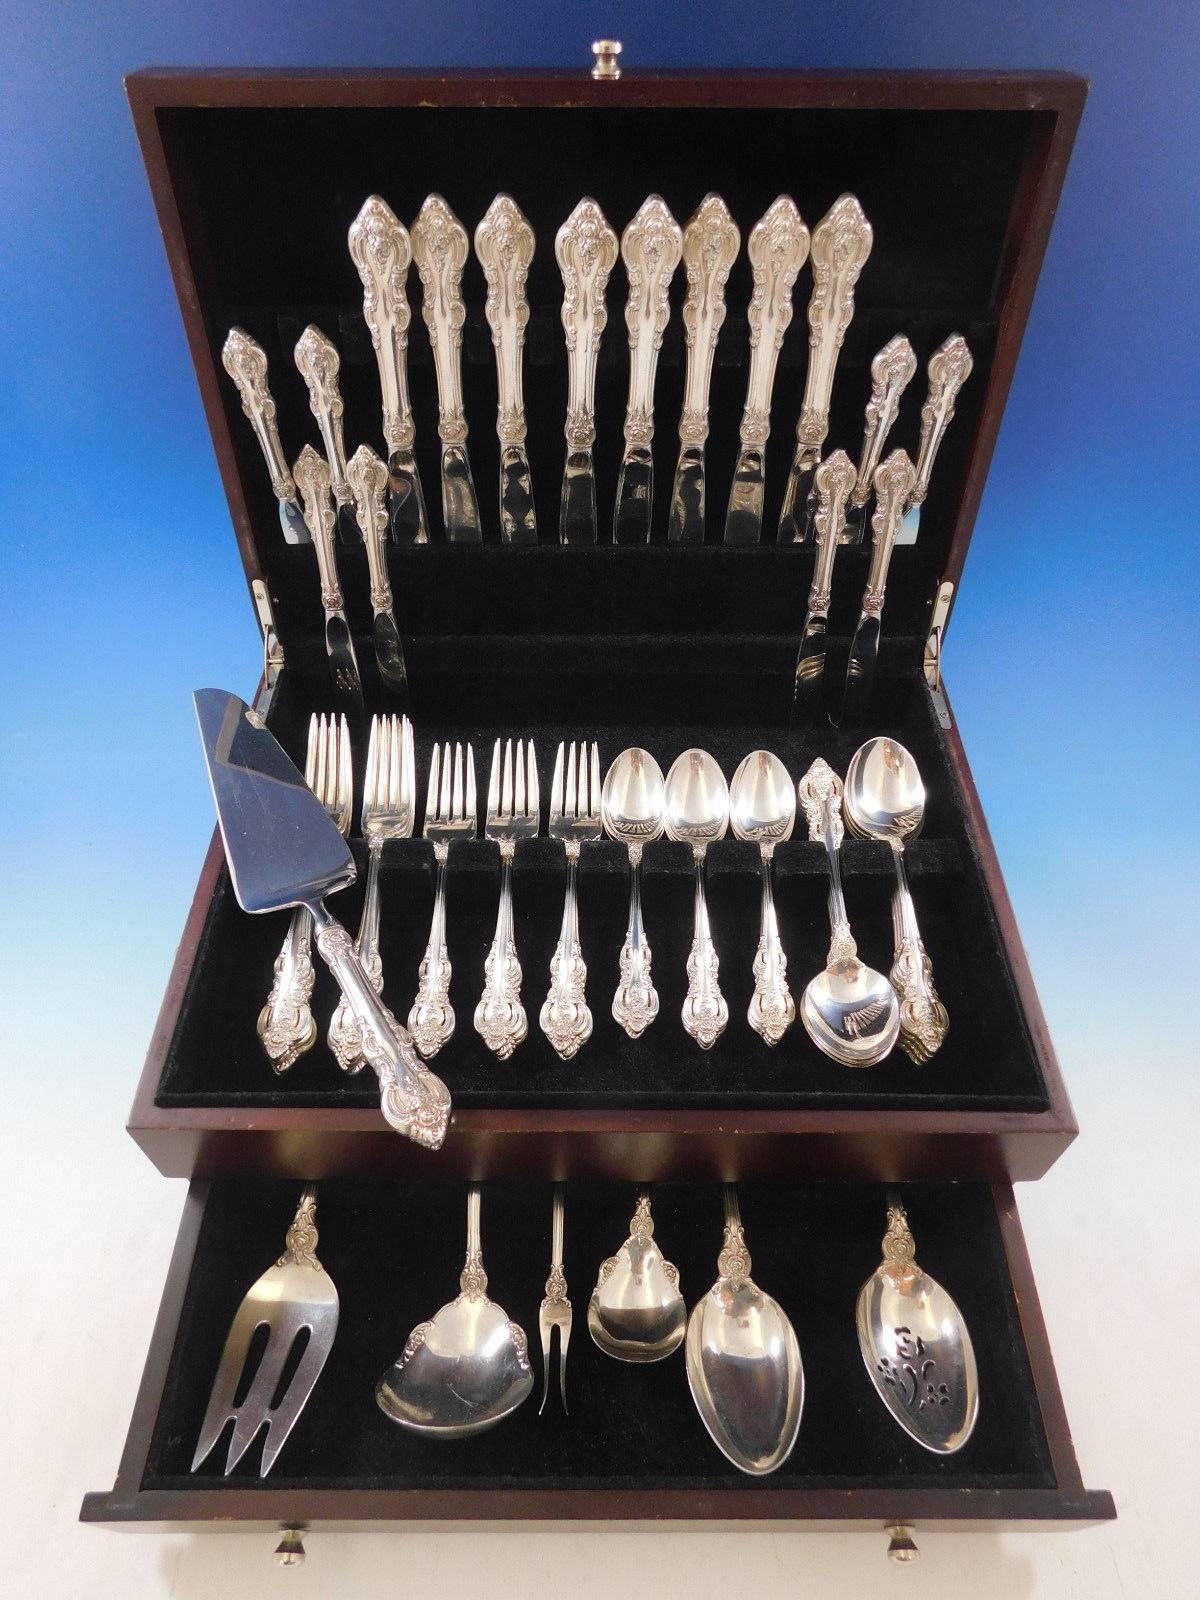 El Grandee by Towle sterling silver Flatware set, 55 pieces. This set includes:

8 Knives, 9